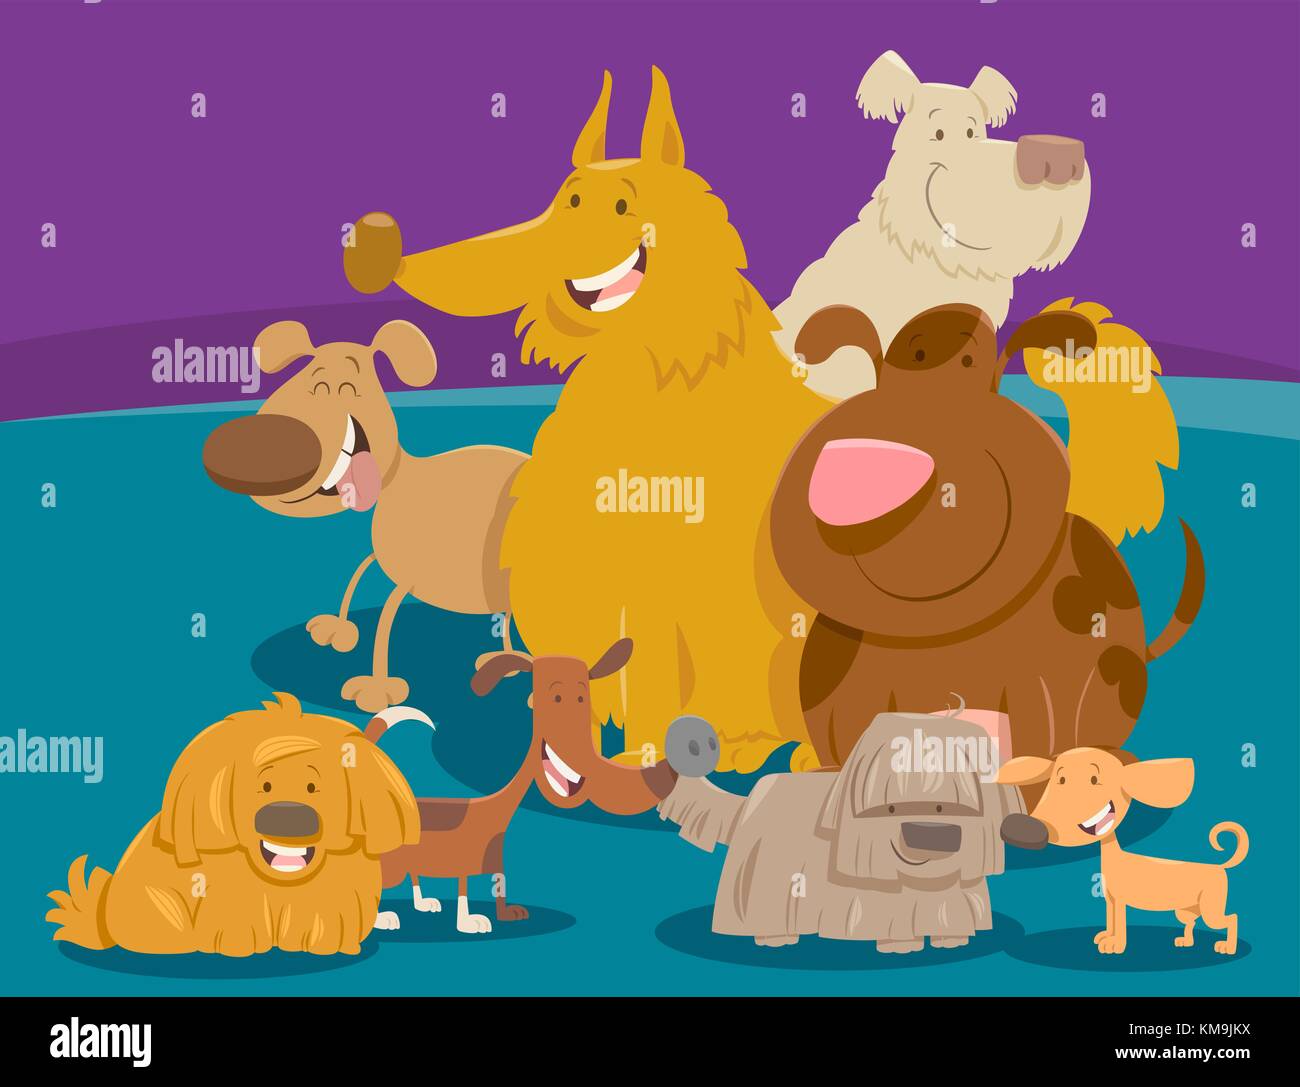 Cartoon Illustration of Funny Dogs Animal Characters Group Stock Vector